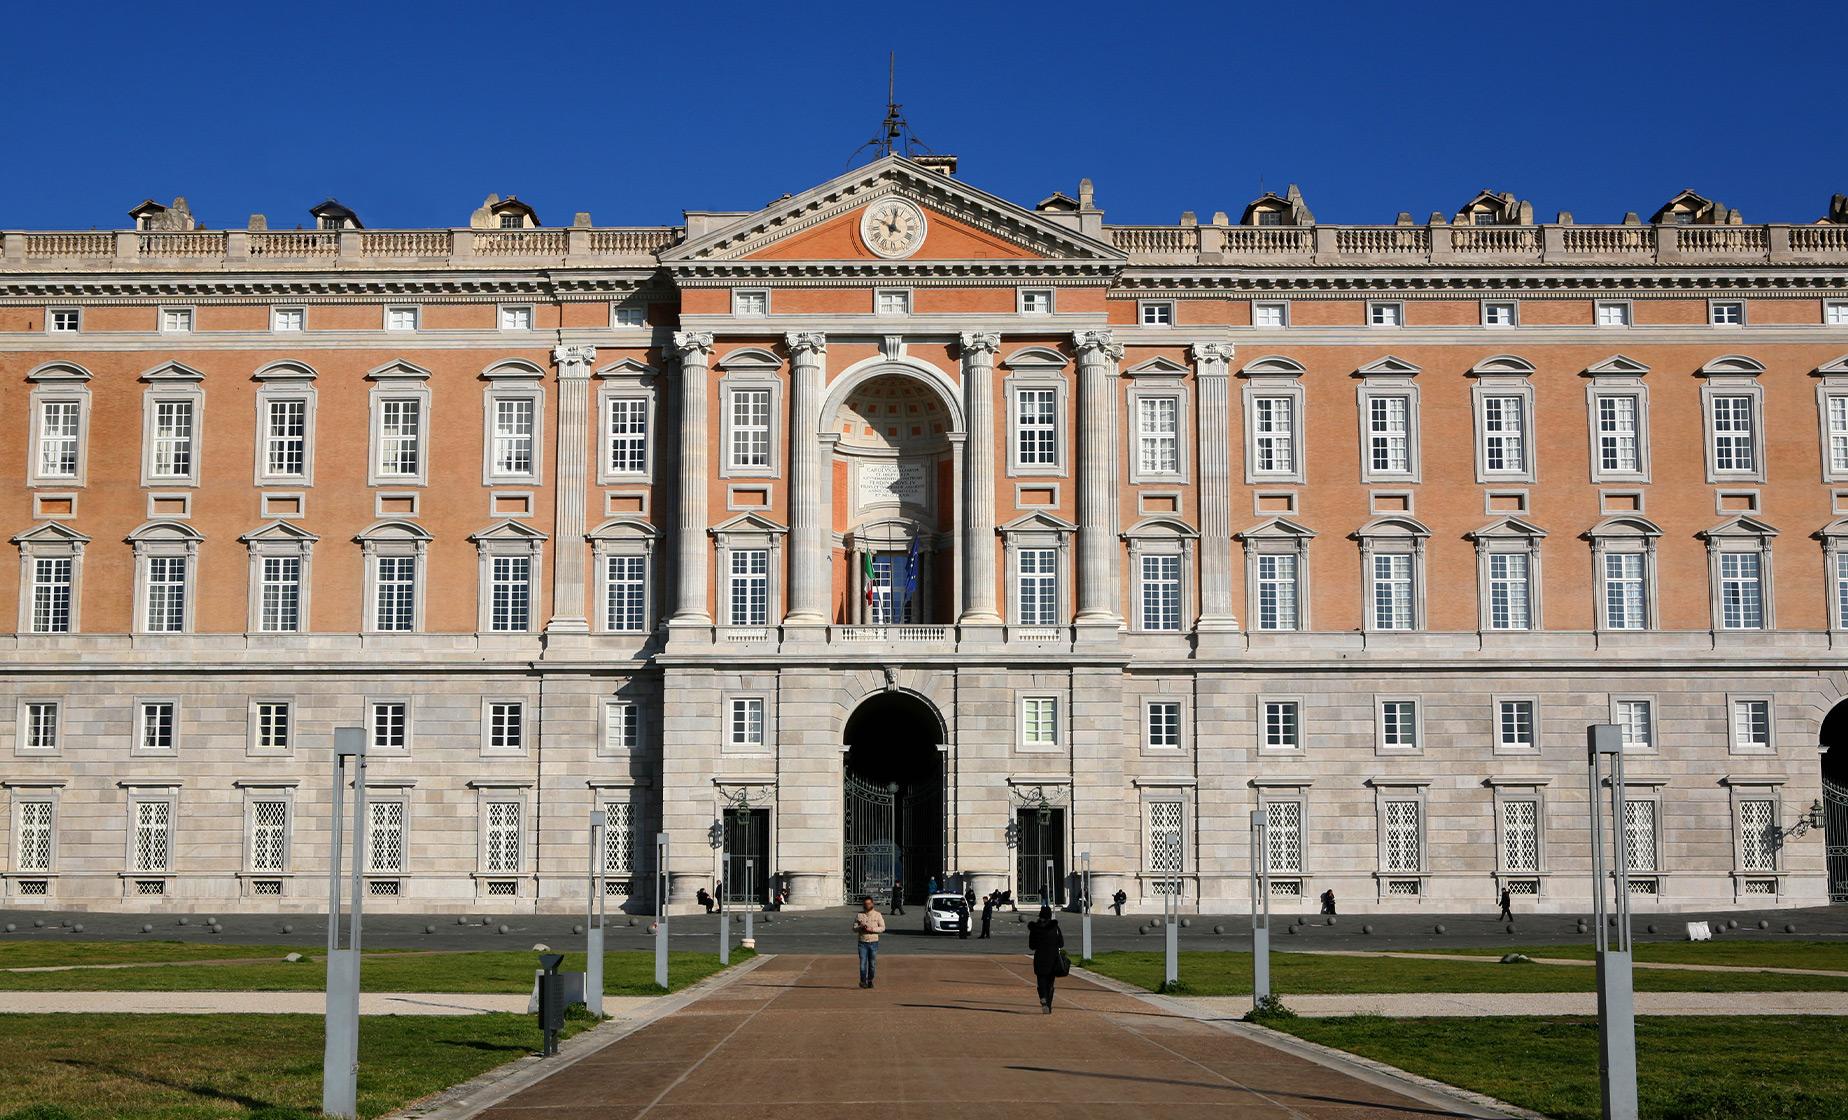 Private Palace of Caserta & La Reggia Outlet Day Tour from Naples